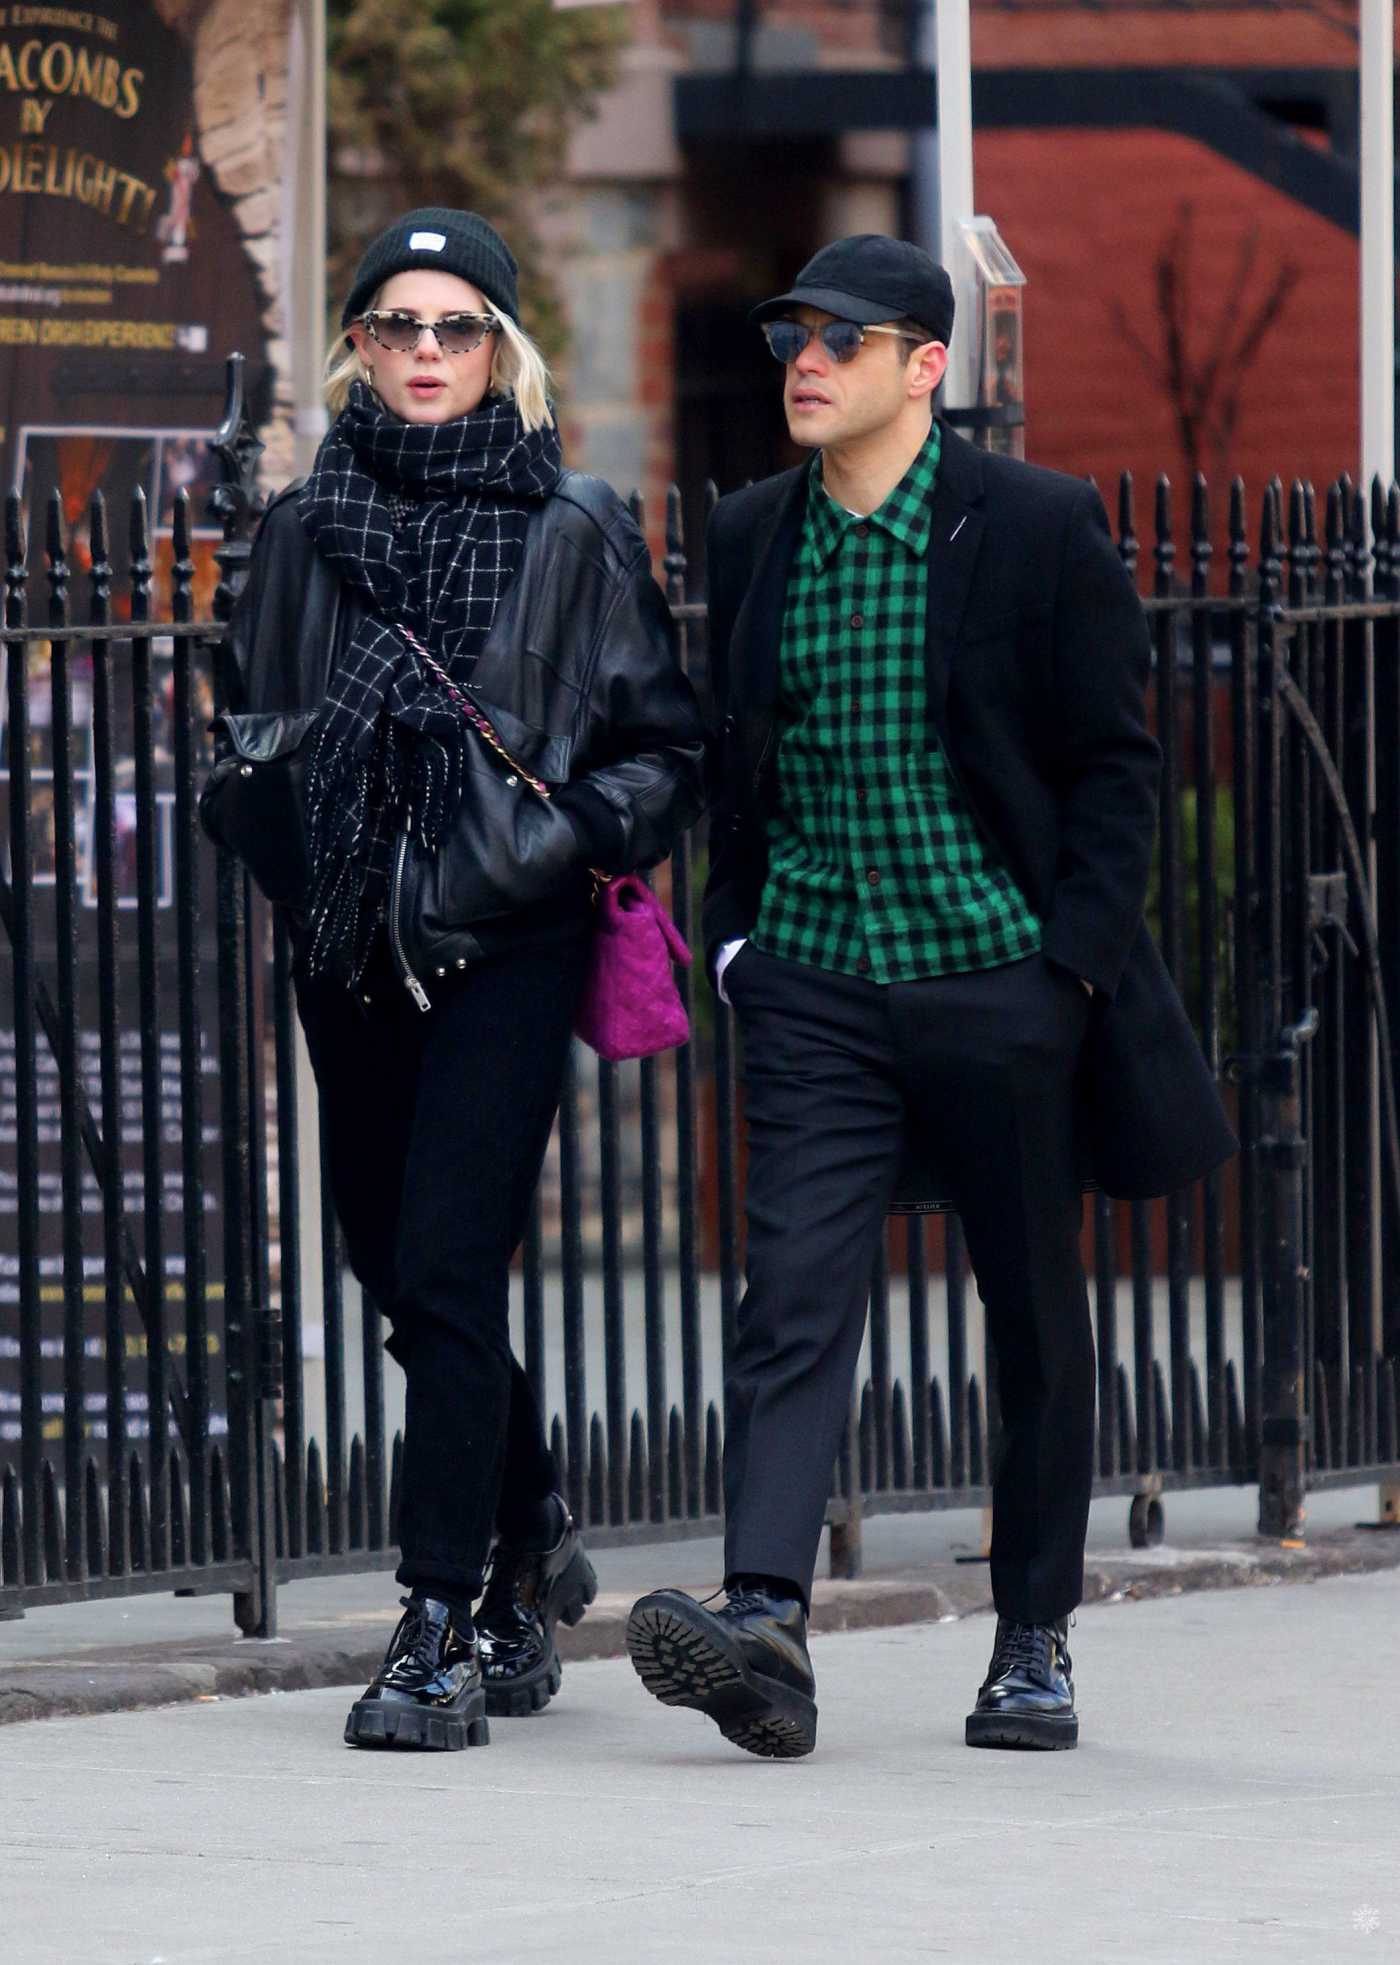 Rami Malek in a Black Cap Was Seen Out with Lucy Boynton in NY 01/21/2020